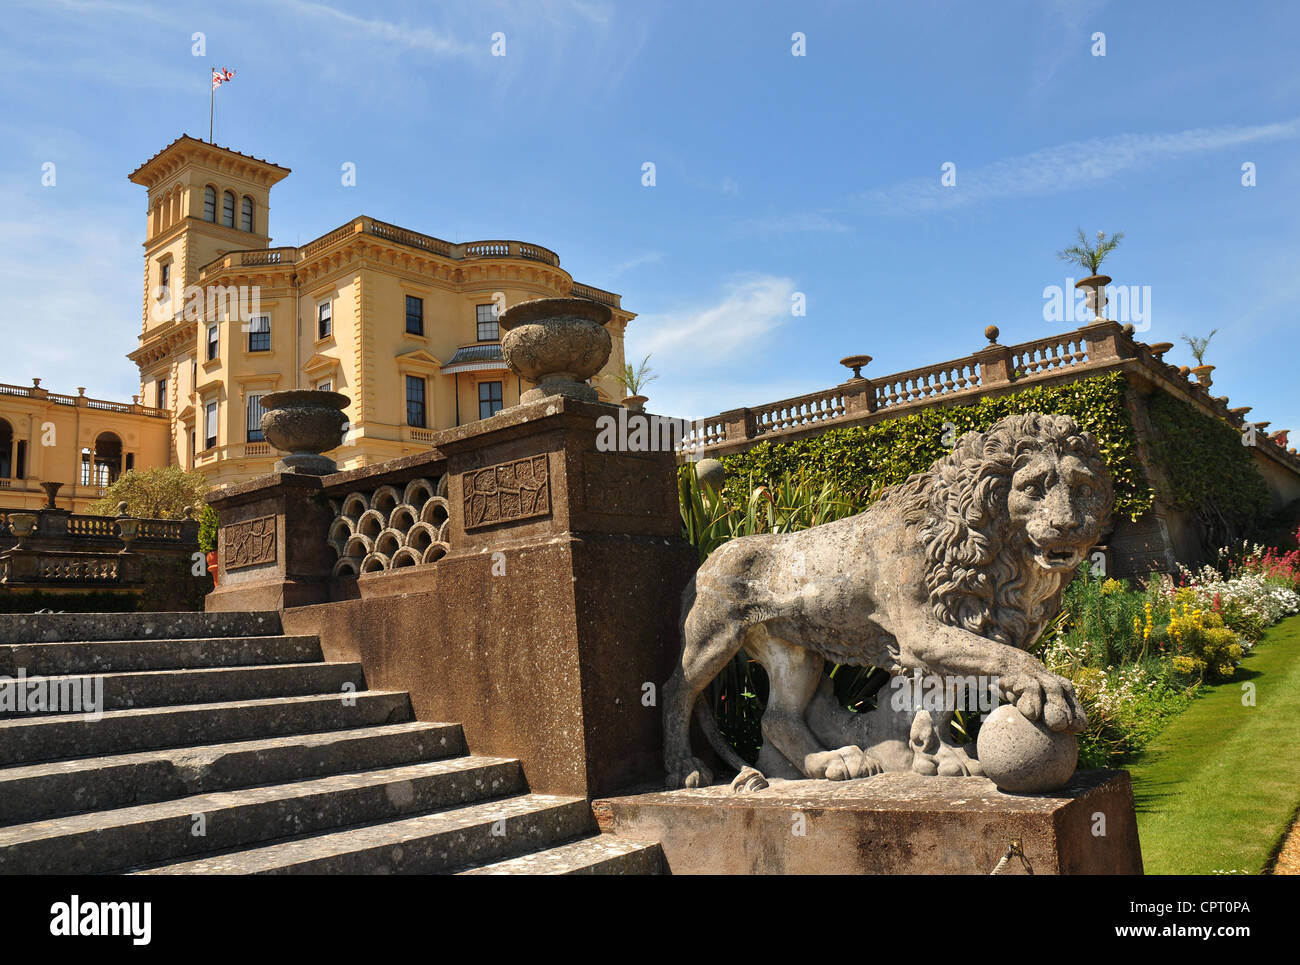 Osborne House , the holiday home of Queen Victoria and Prince Albert on the Isle of Wight, England Stock Photo